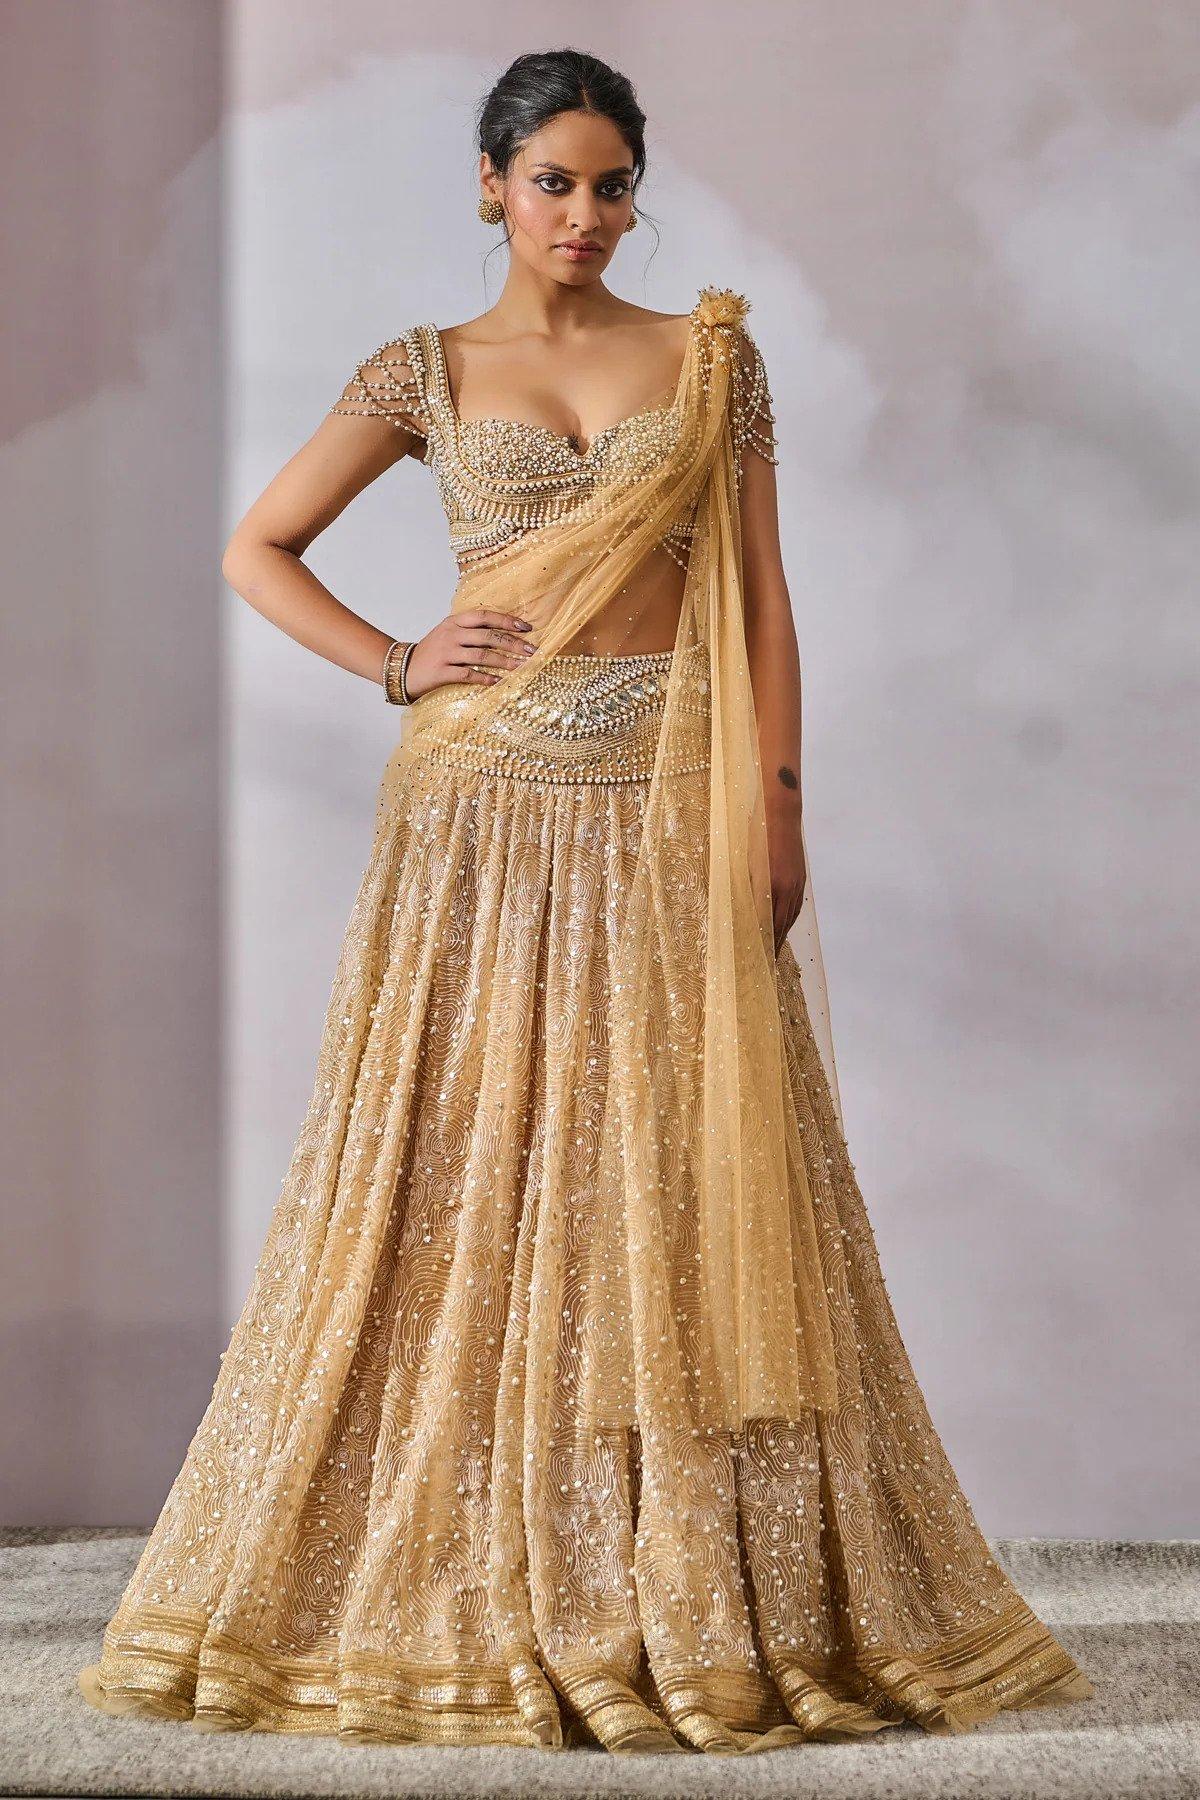 Single Family Combo Dress Indian Wedding Traditional Dress at Rs 2395/piece  in Surat